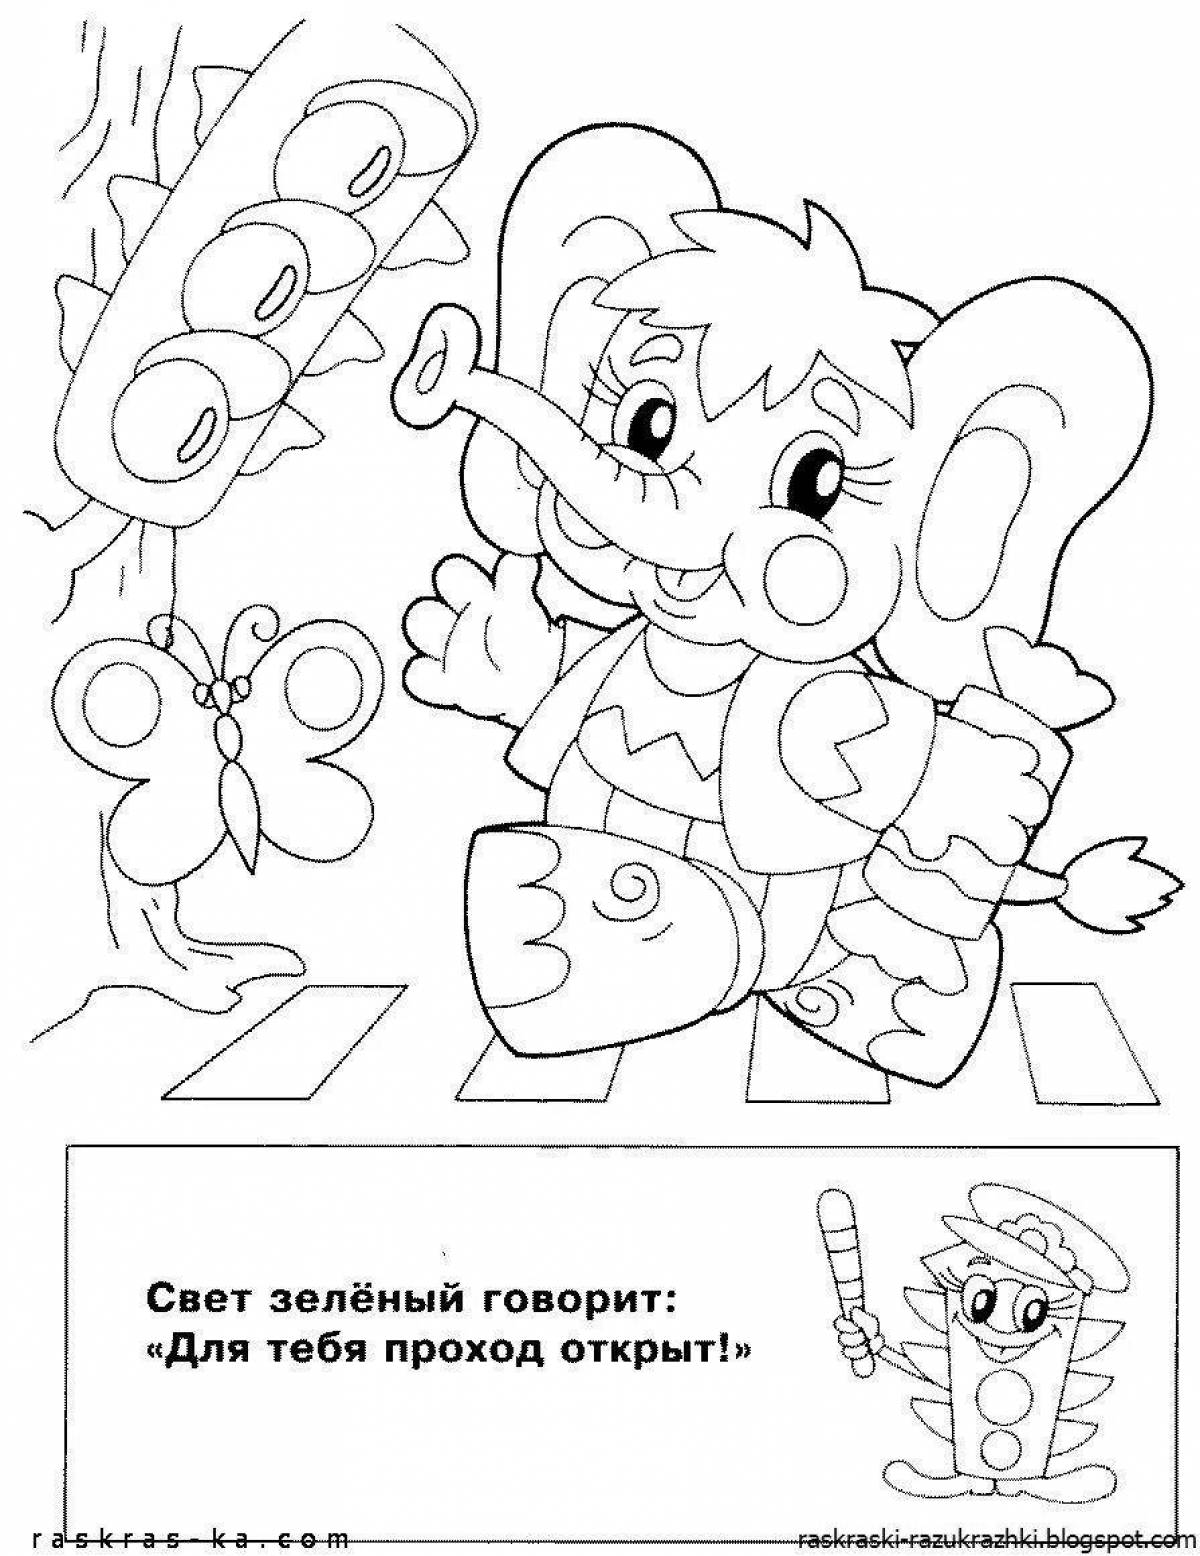 Colorful safety coloring page for 6-7 year olds